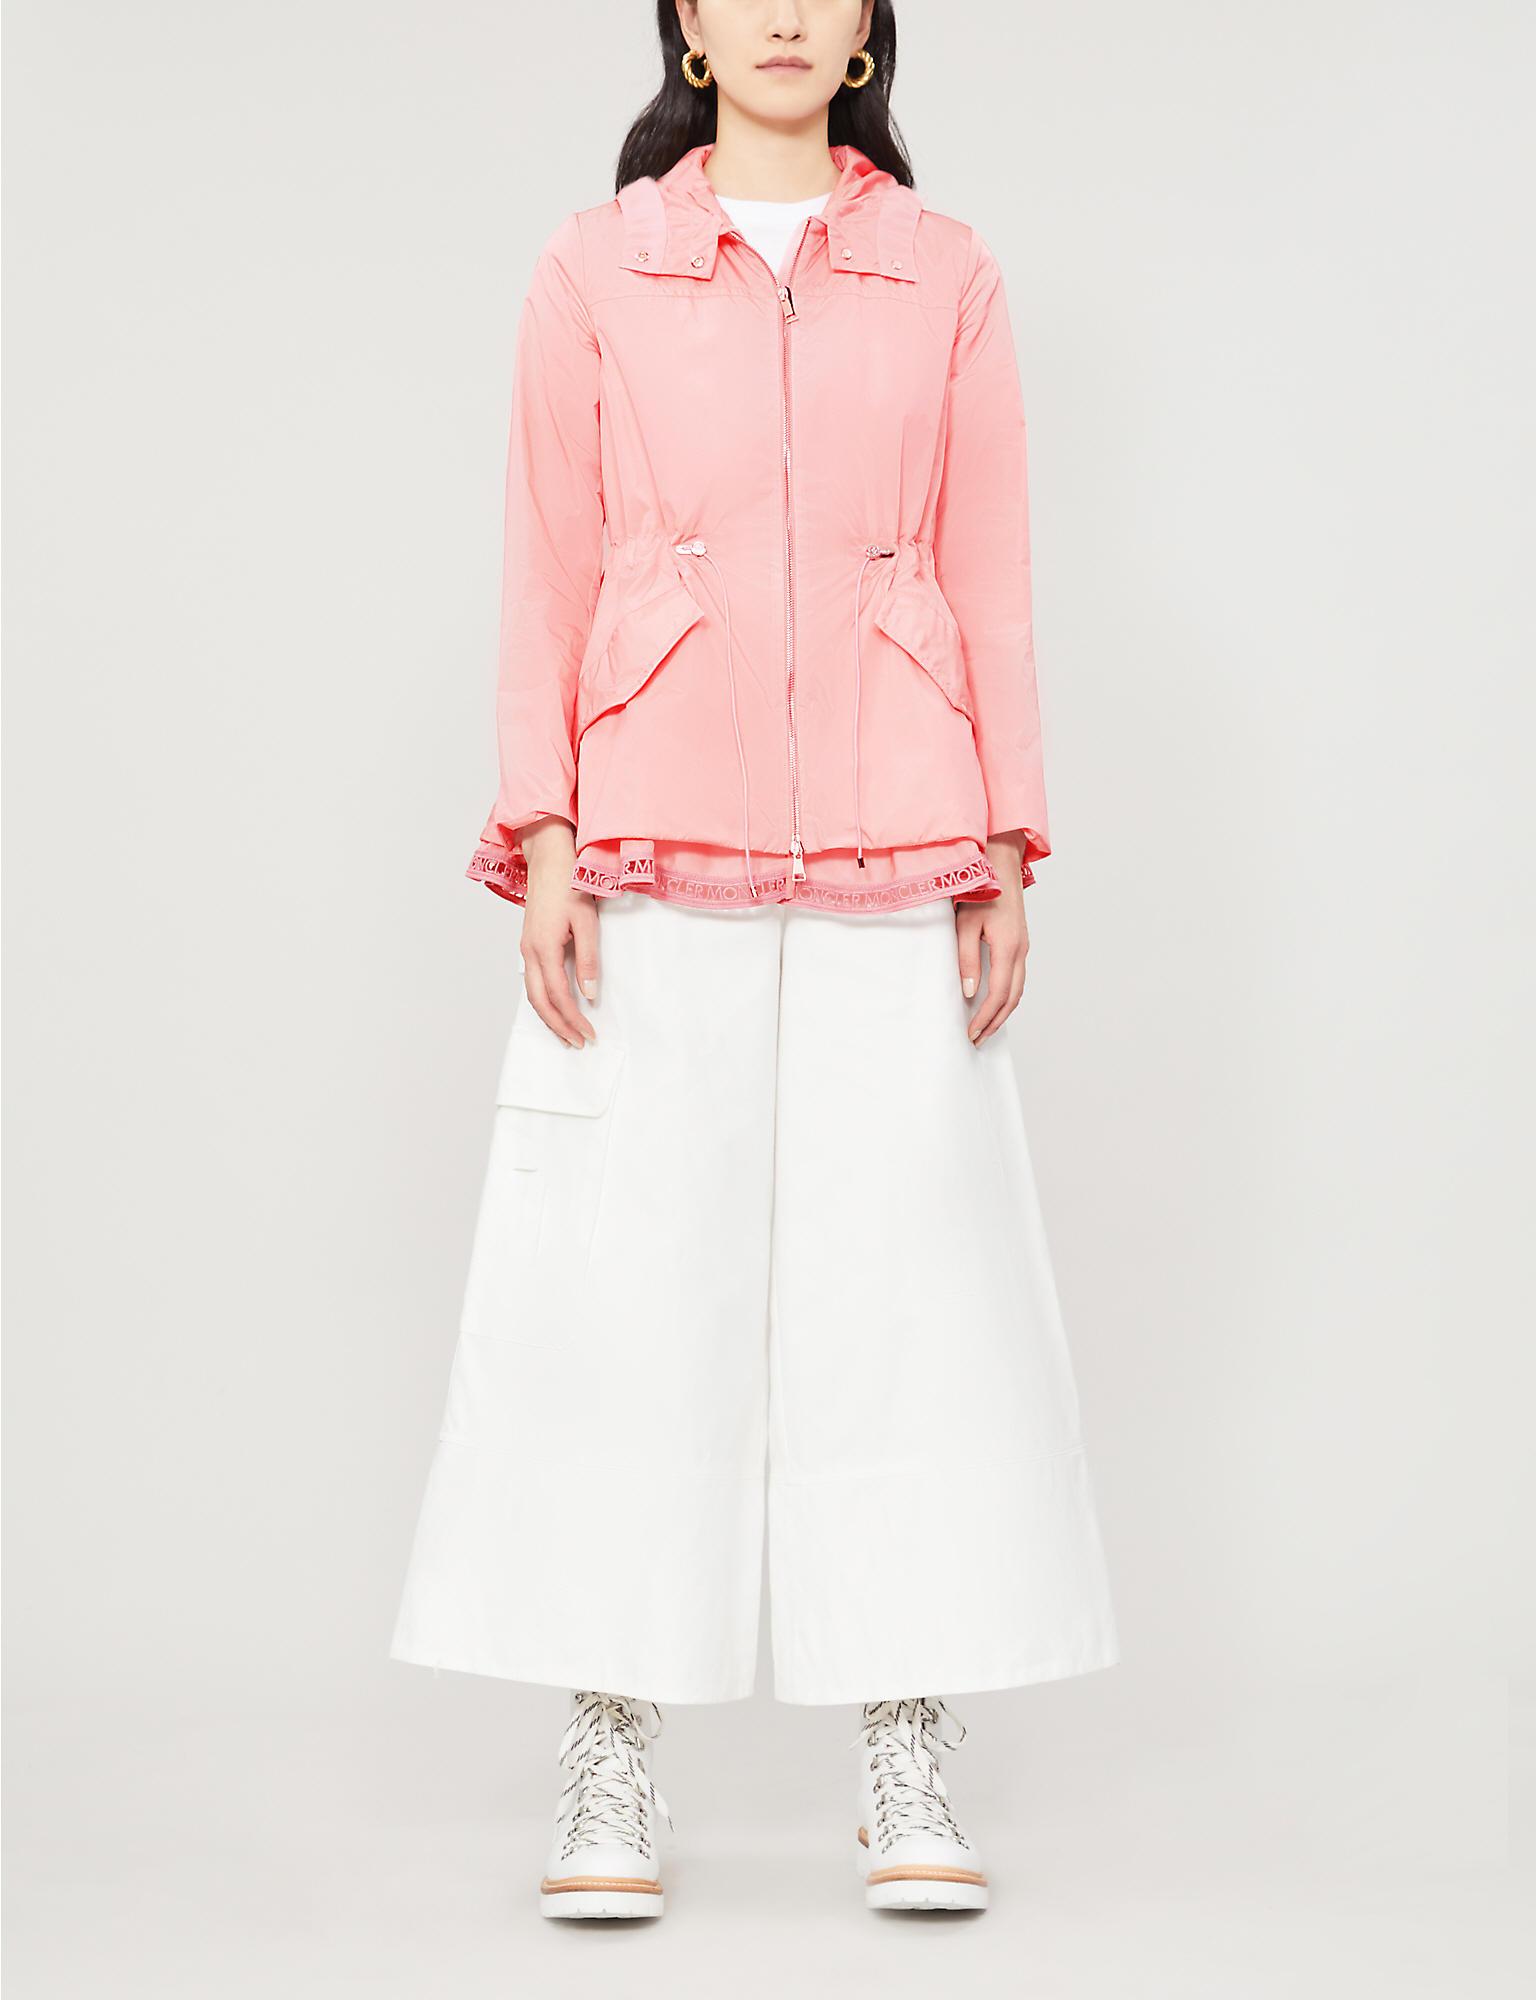 Moncler Loty Hooded Shell Jacket in Pale Pink (Pink) - Lyst